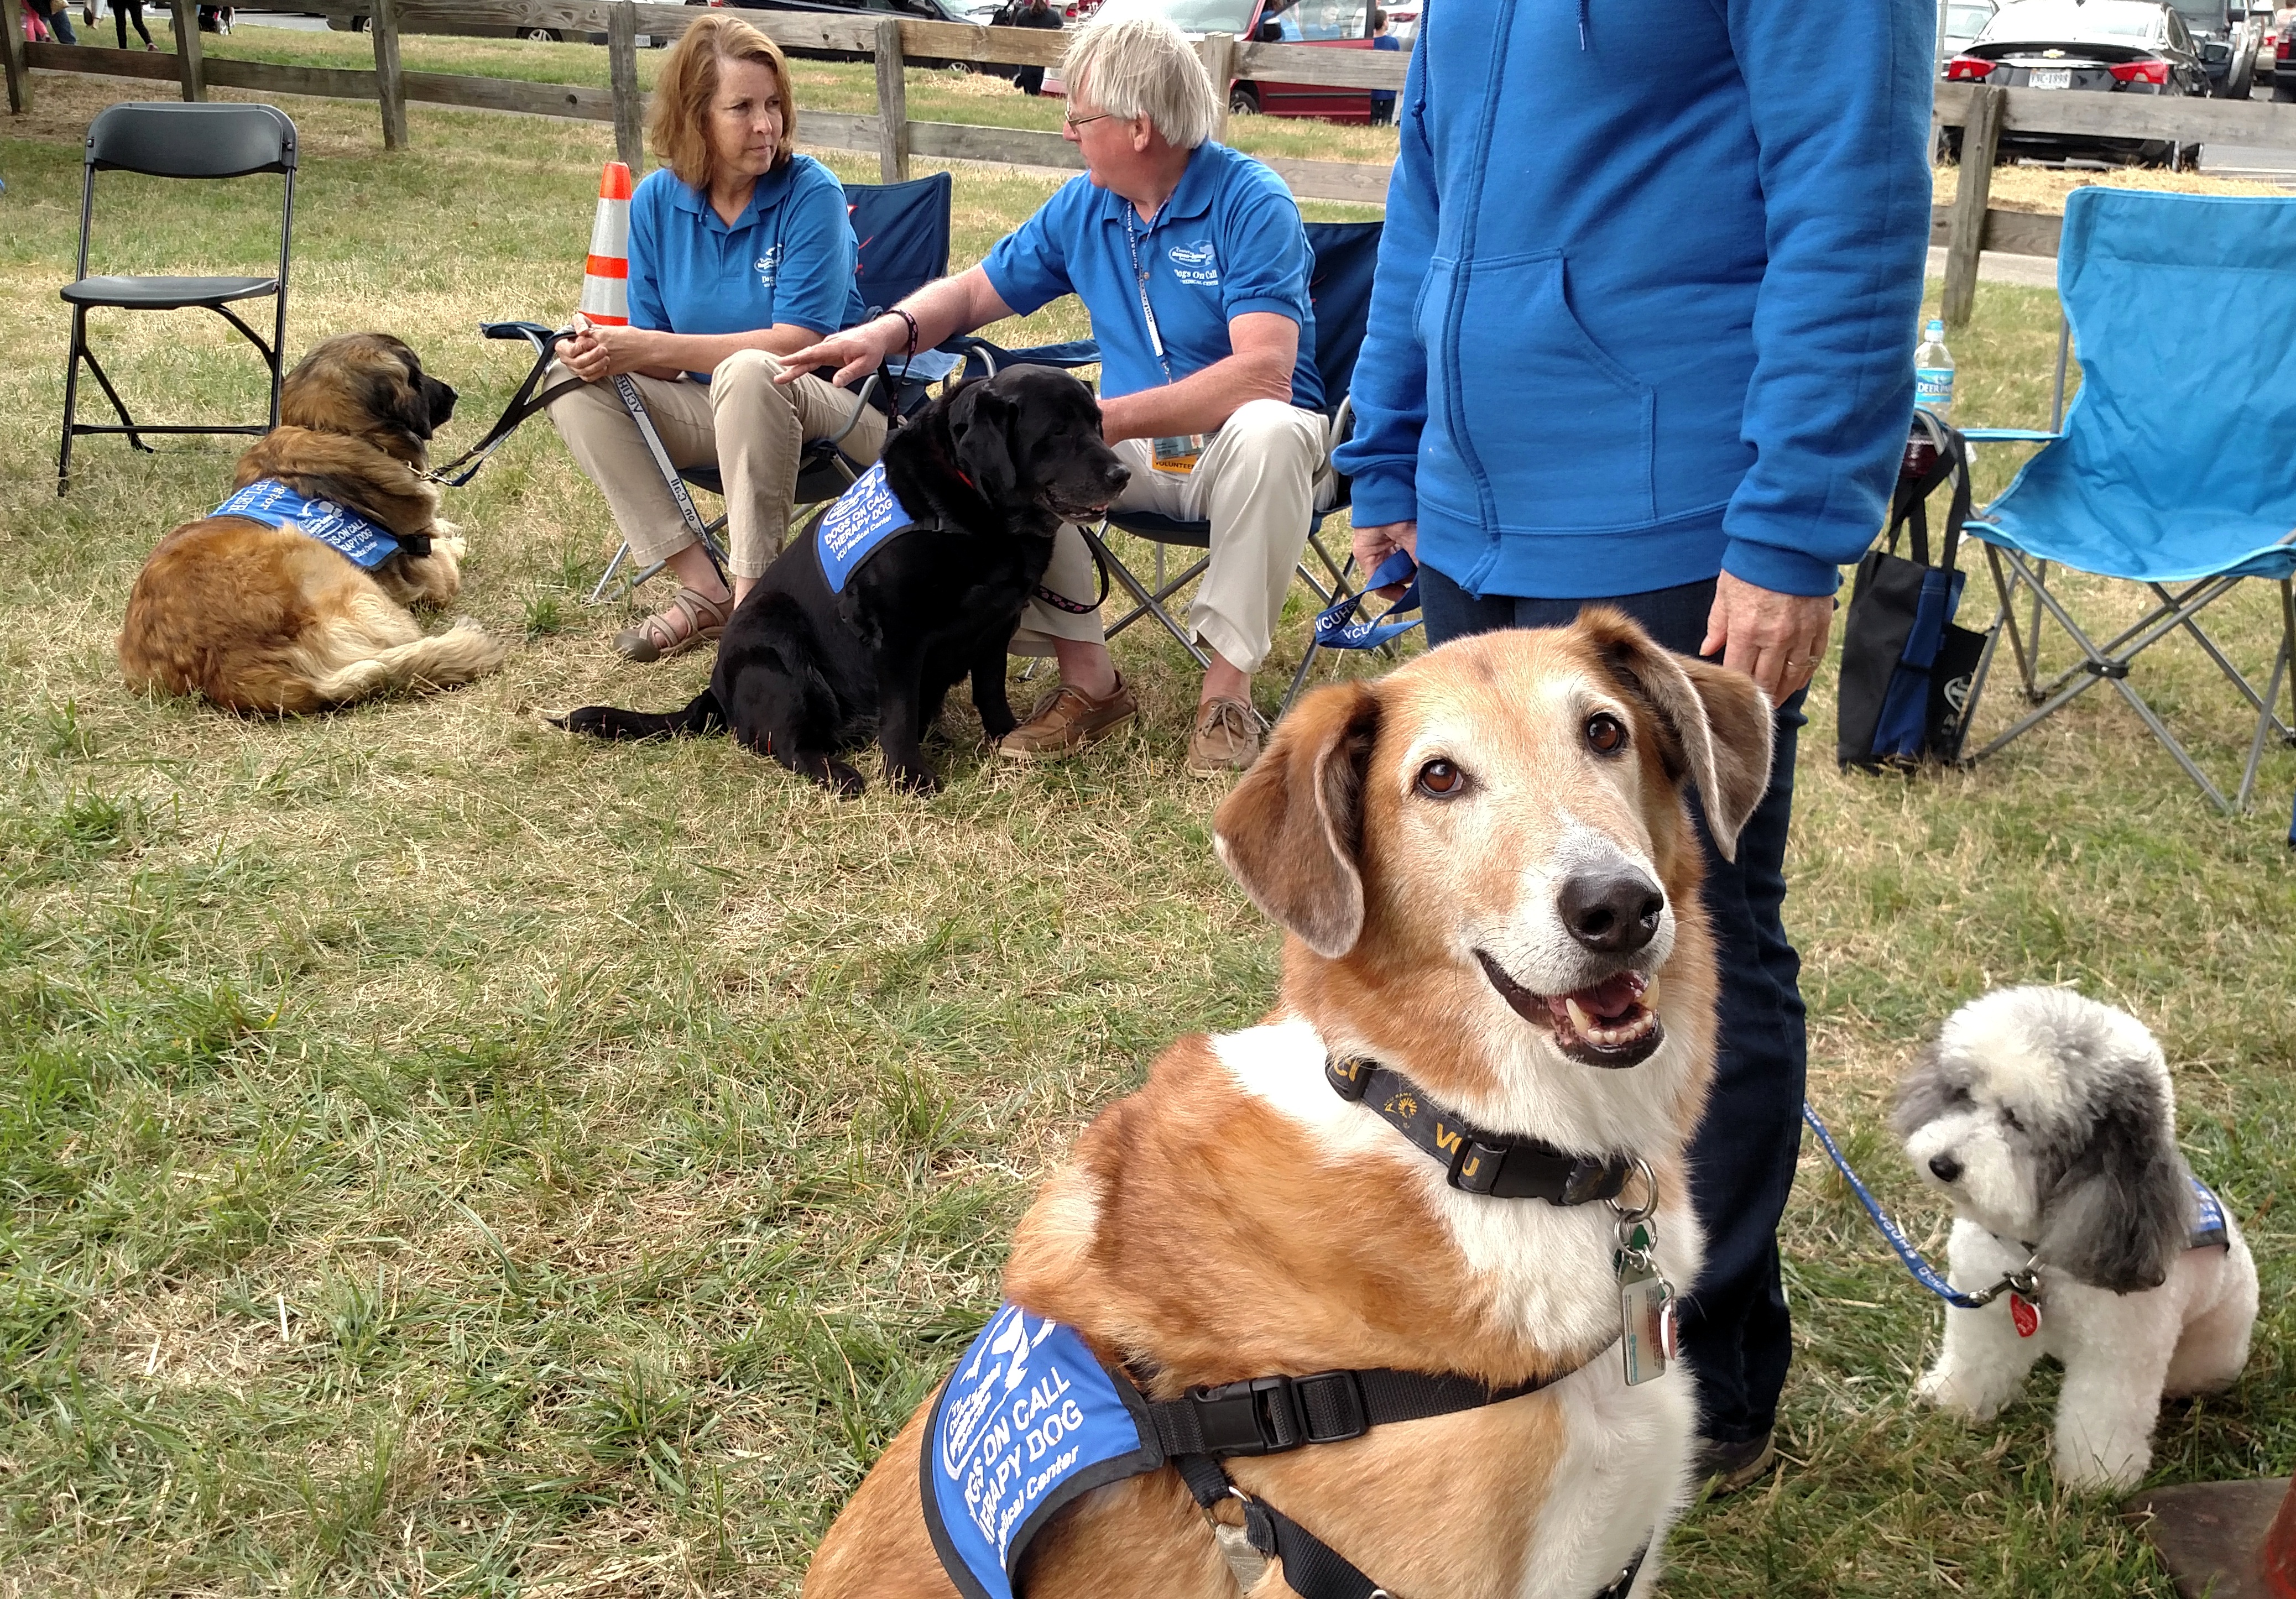 Dogs On Call therapy dog Robbie, a red and white collie, poses for the camera with a smile on his face. Therapy dogs Lucy (a bichon poodle mix), Lilly (a black lab) and Kepler (a leonberger) are in the background with their handlers. They are at Maymont Children's Farm.